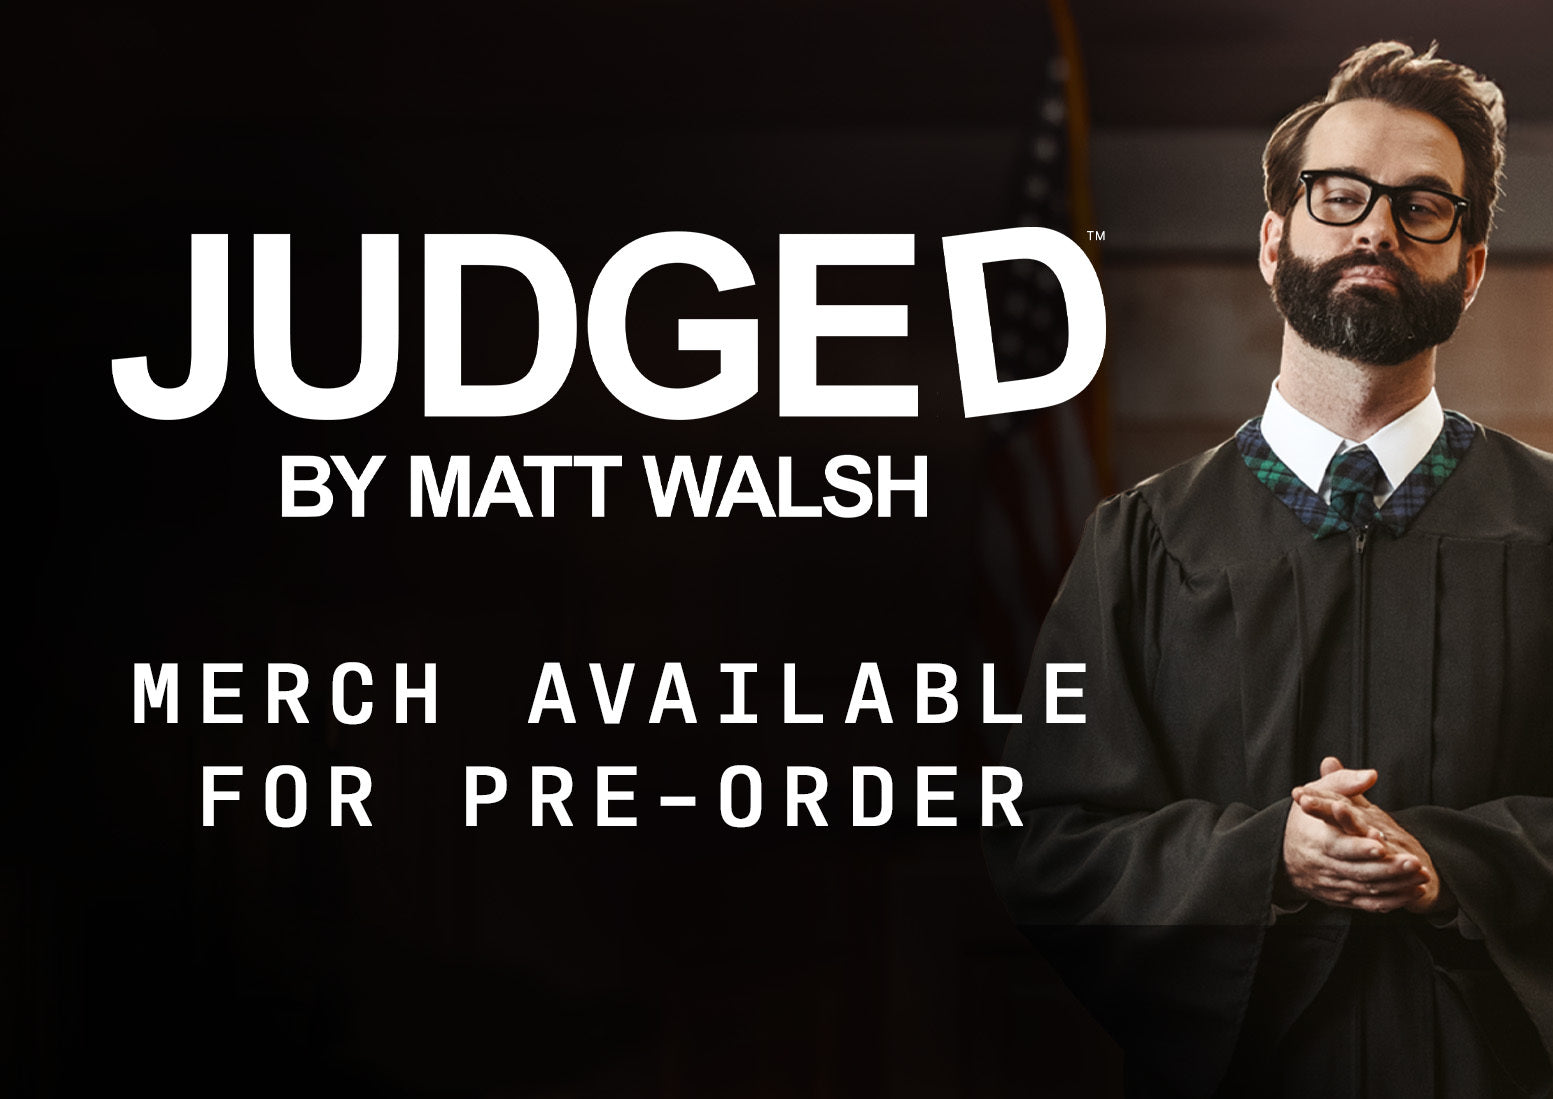 Judged by Matt Walsh Merch Available for Pre-Order